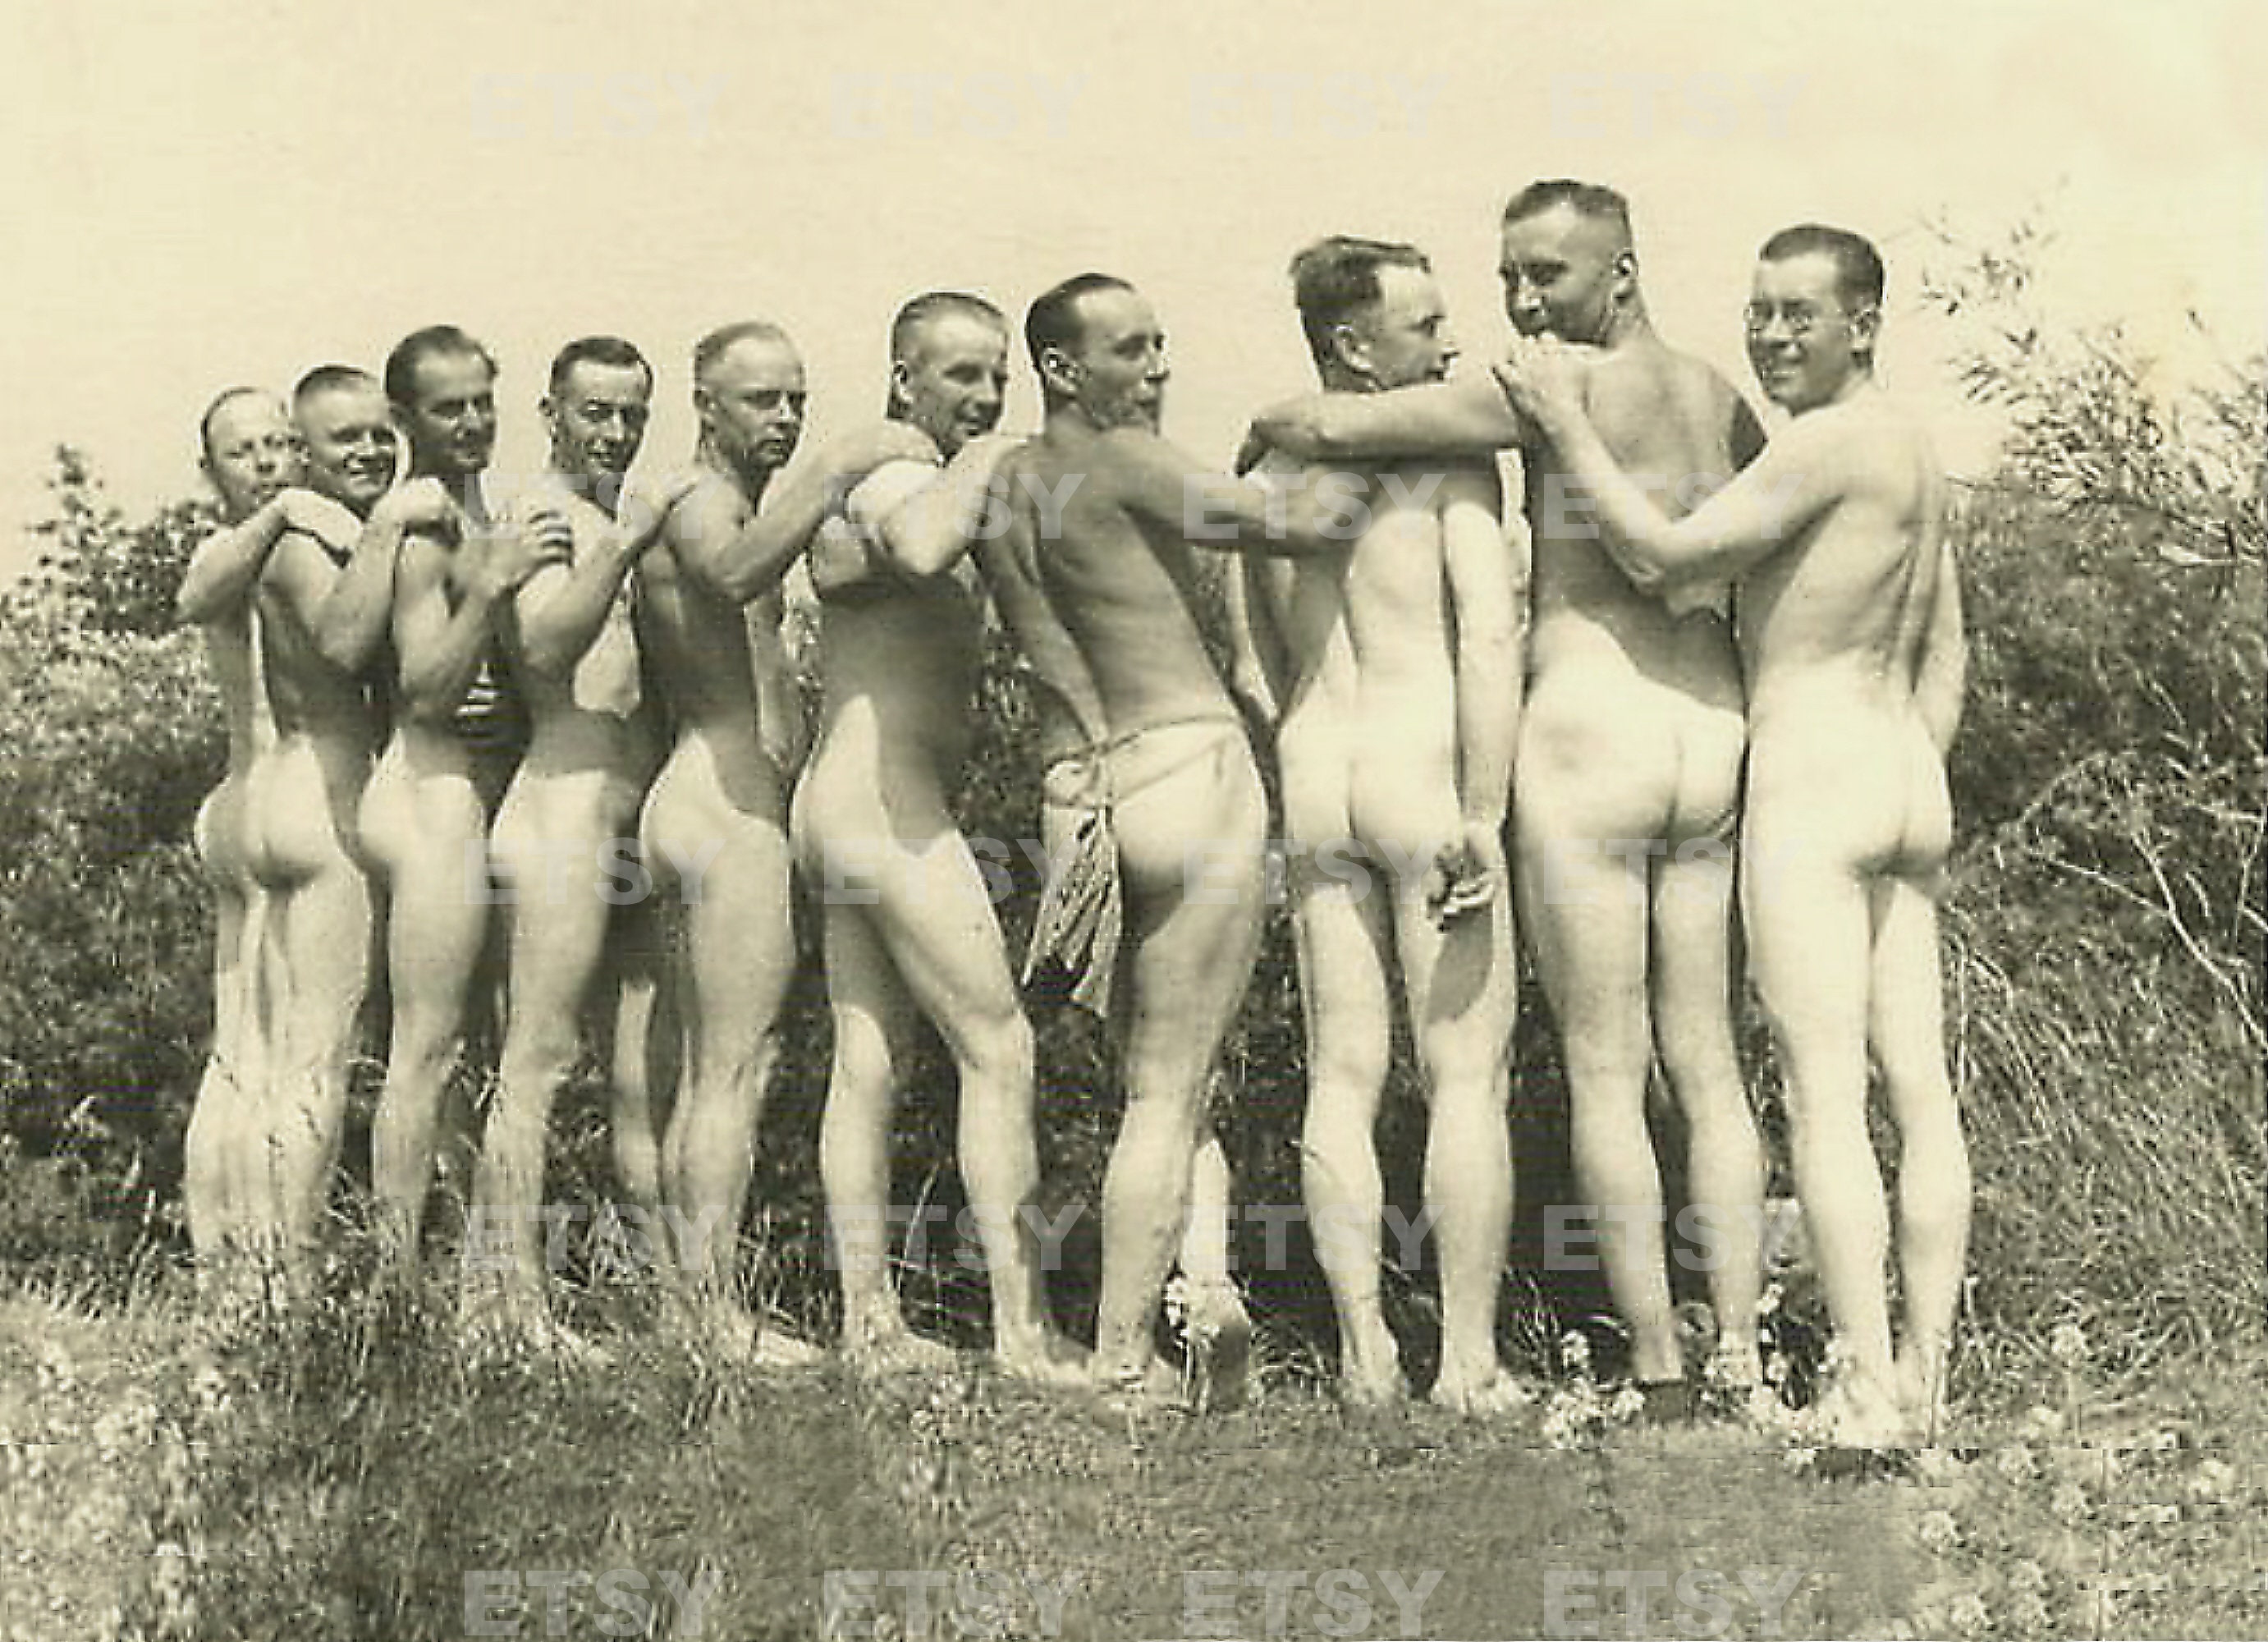 World war two soldiers stripped naked literally